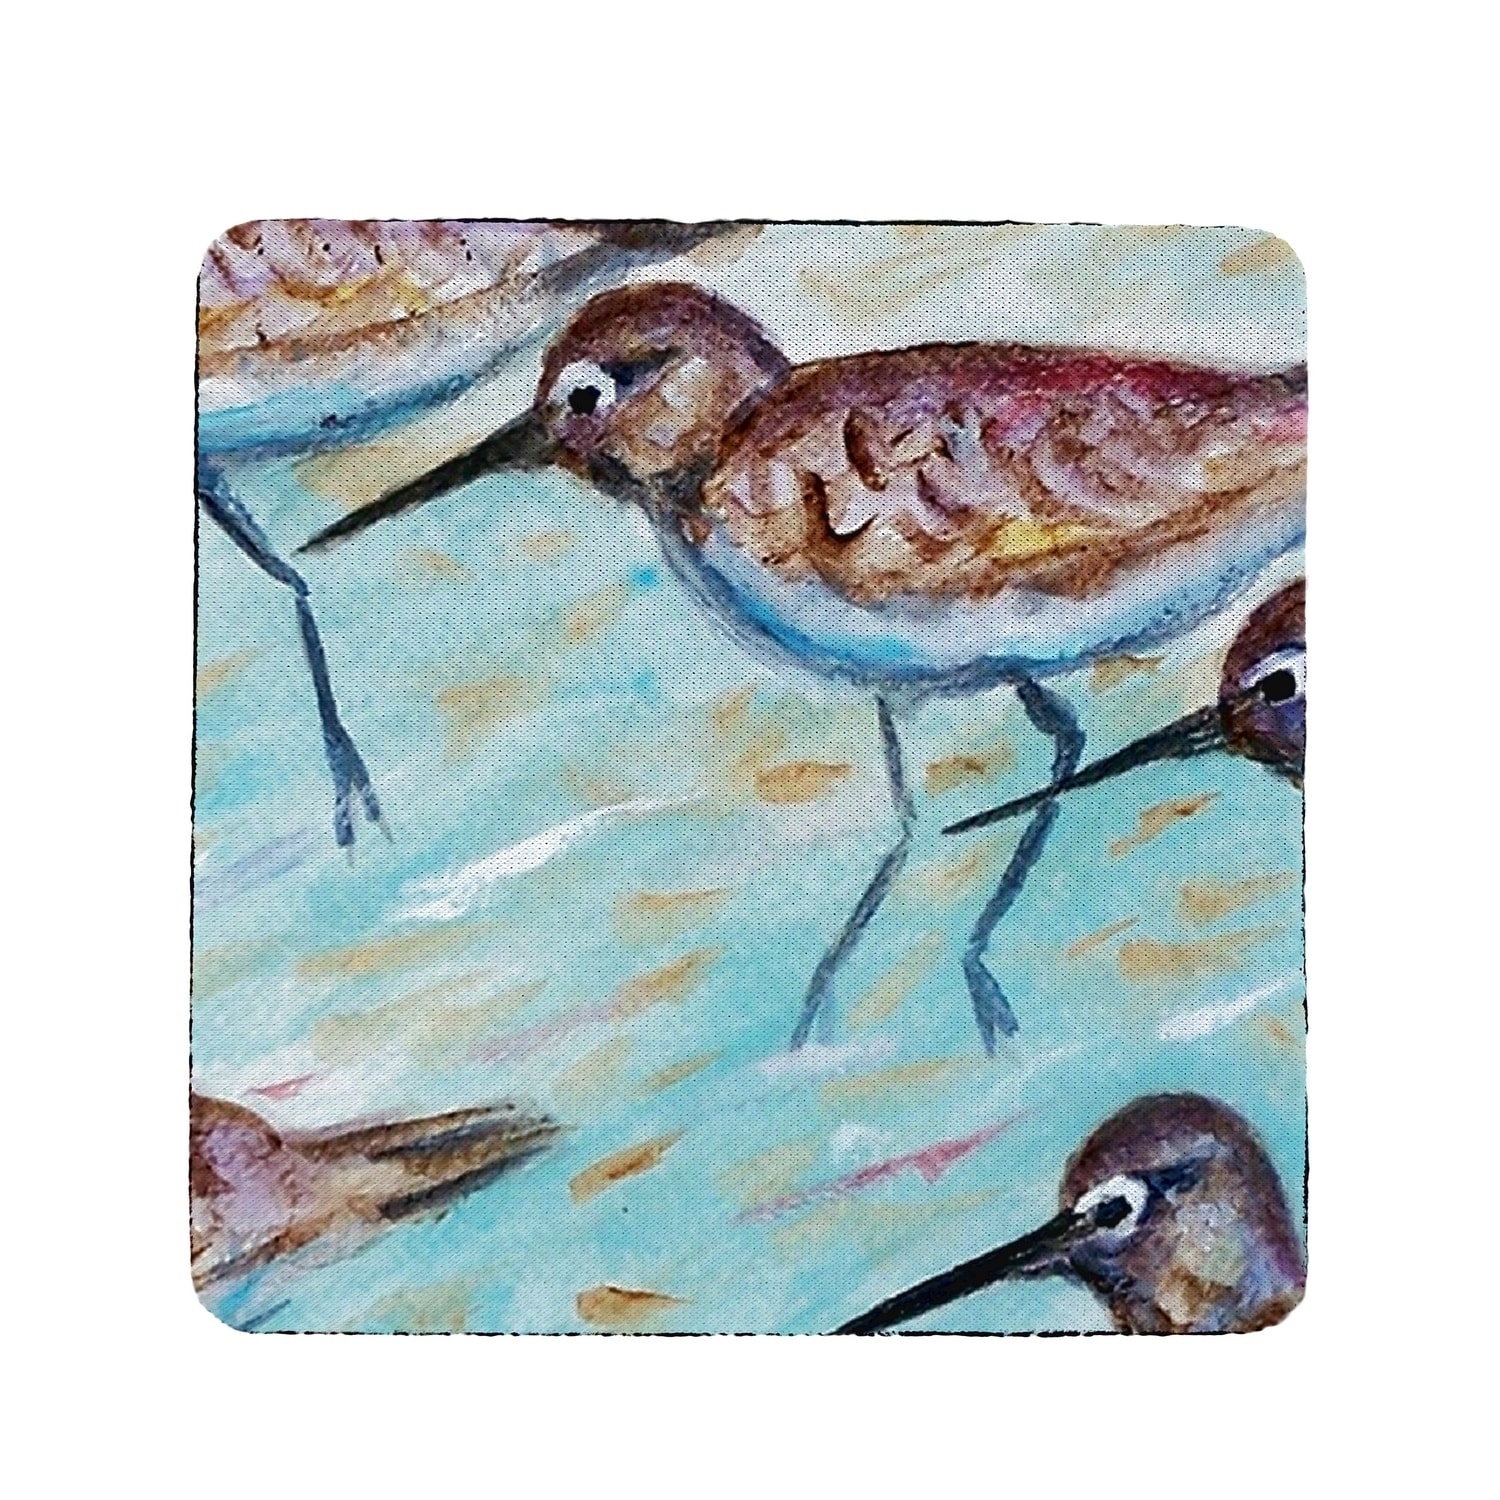 Sandpipers Coaster Set of 4